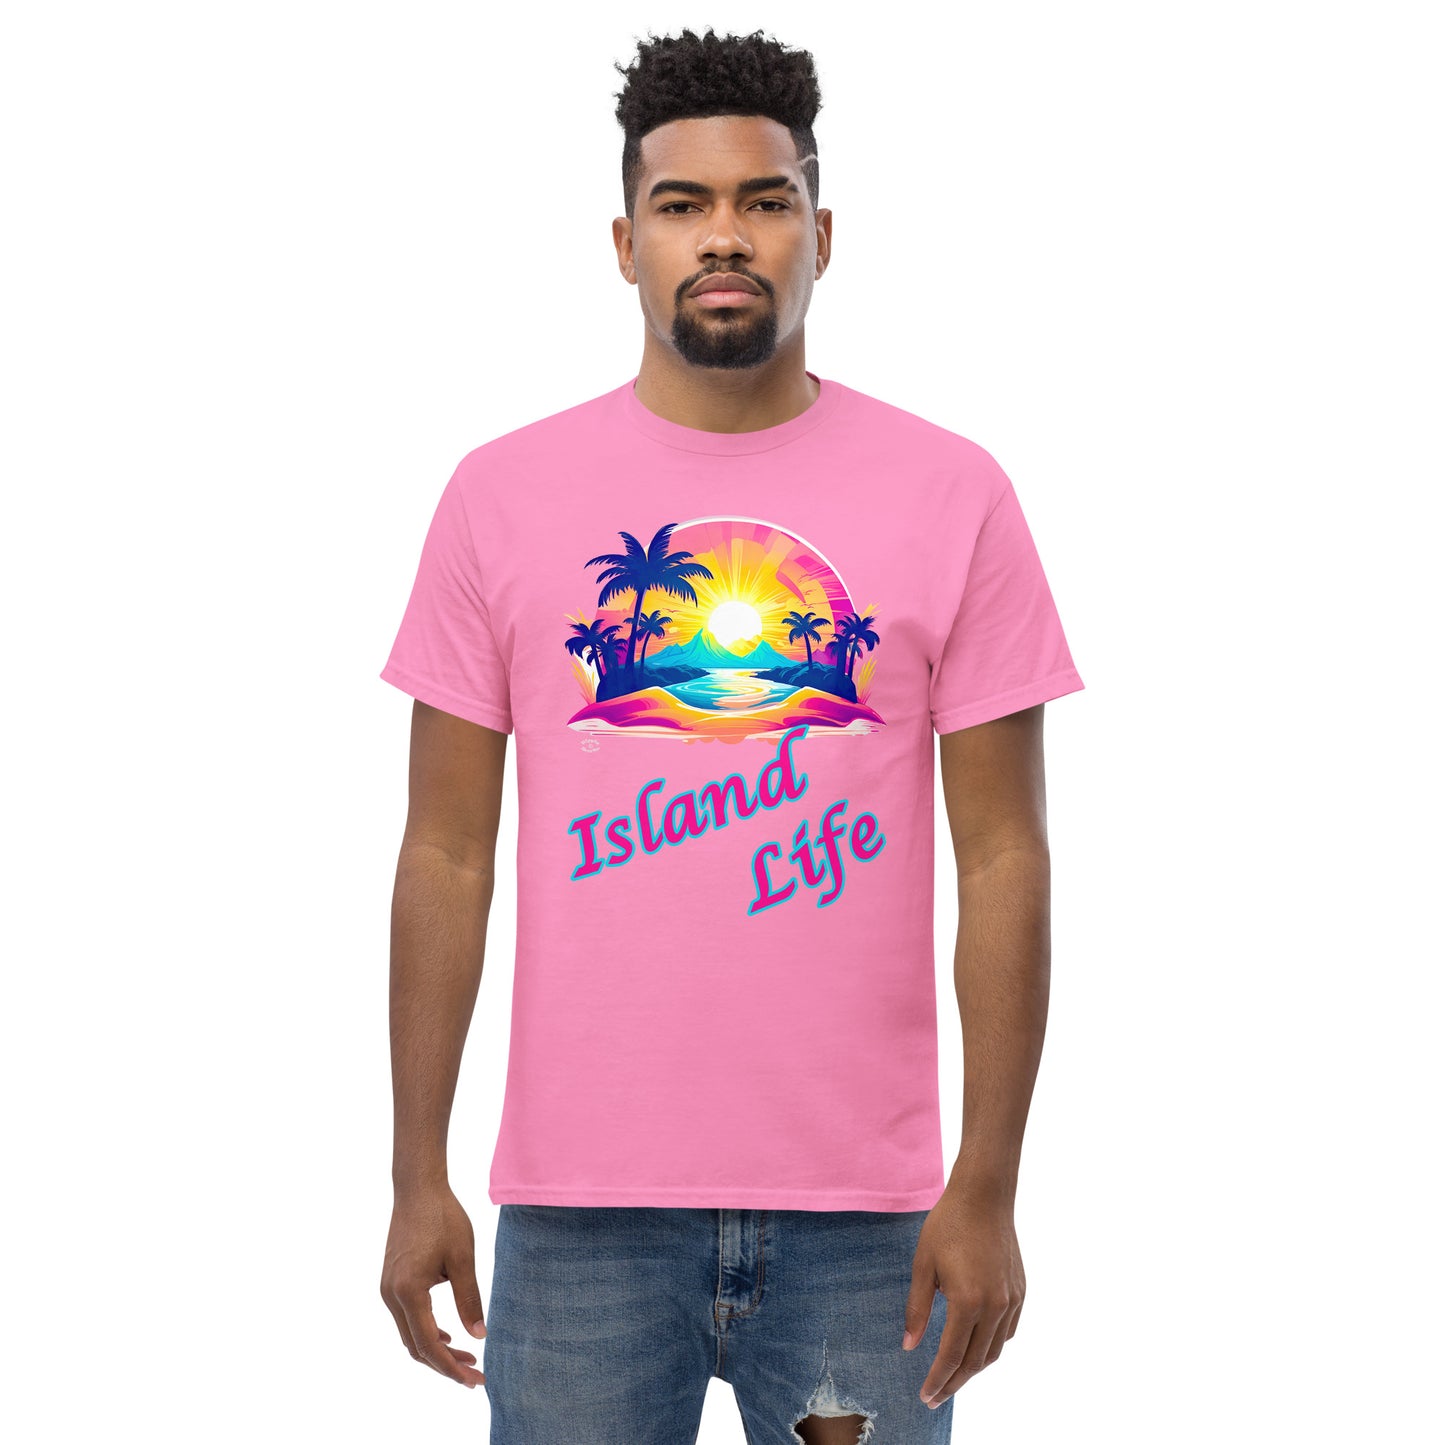 A picture of a man modeling a Men's Classic Tee / Tshirt with a large picture on the front of a tropical island paradise and the text Island Life underneath - front - azalea pink